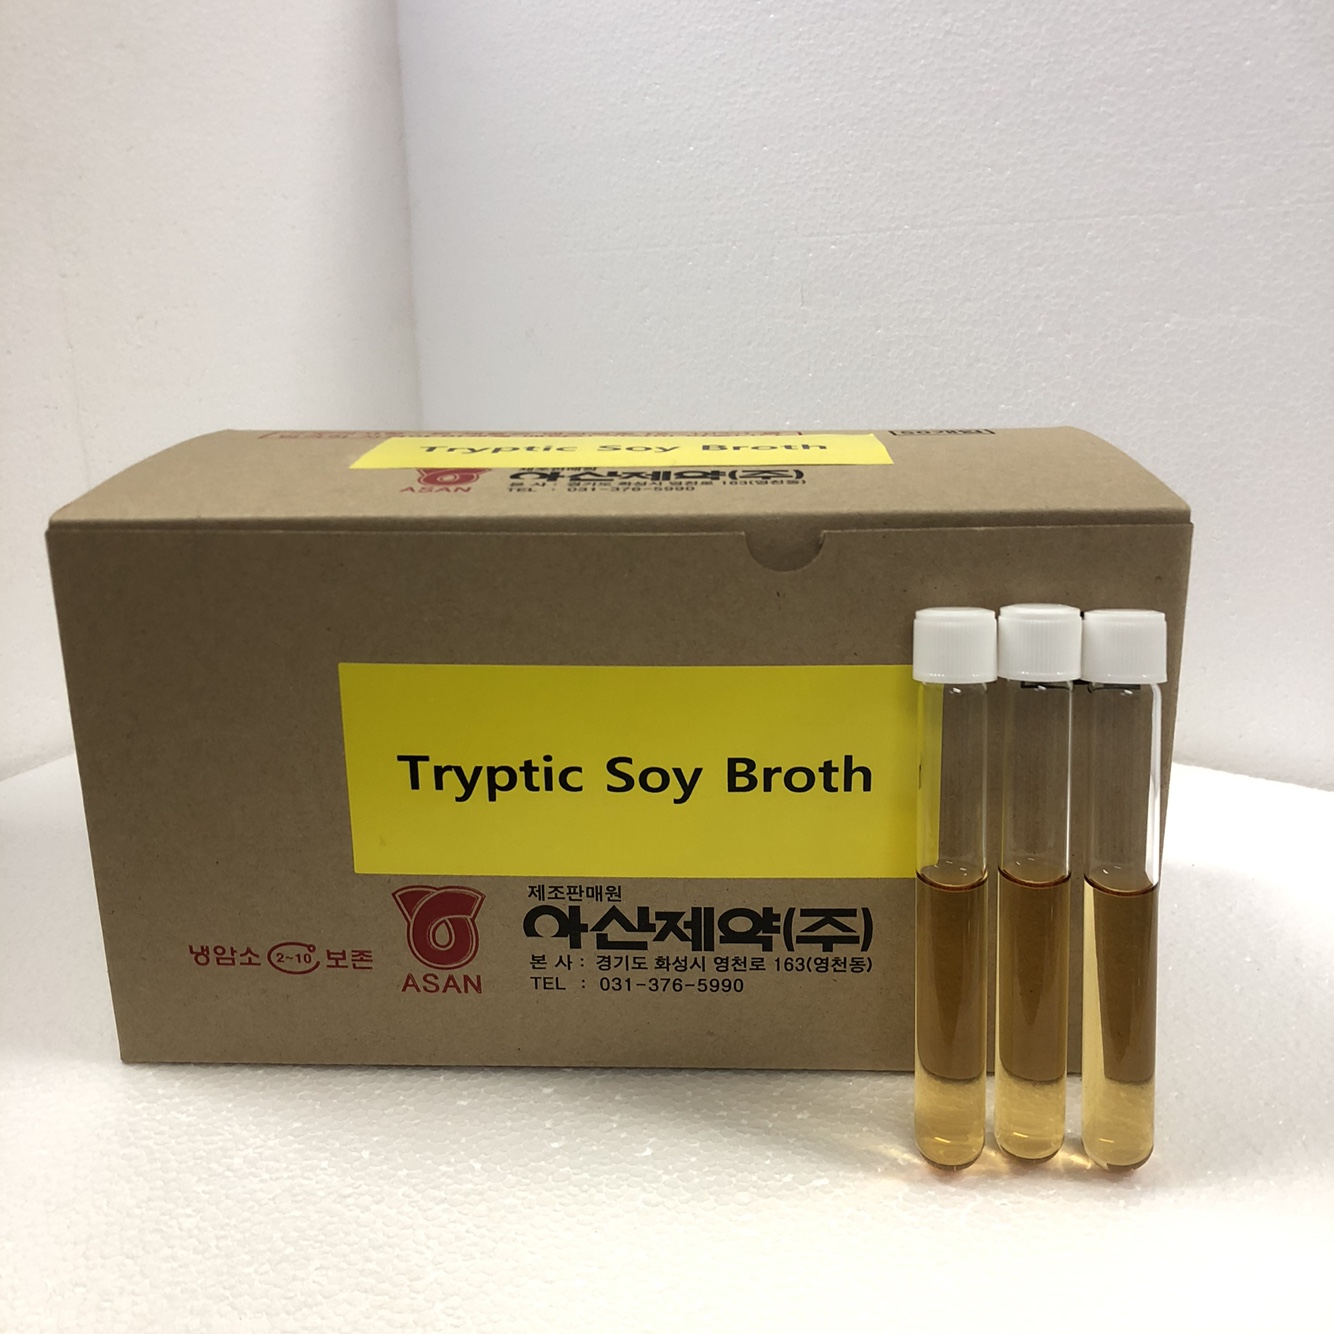 Tryptic Soy Broth II